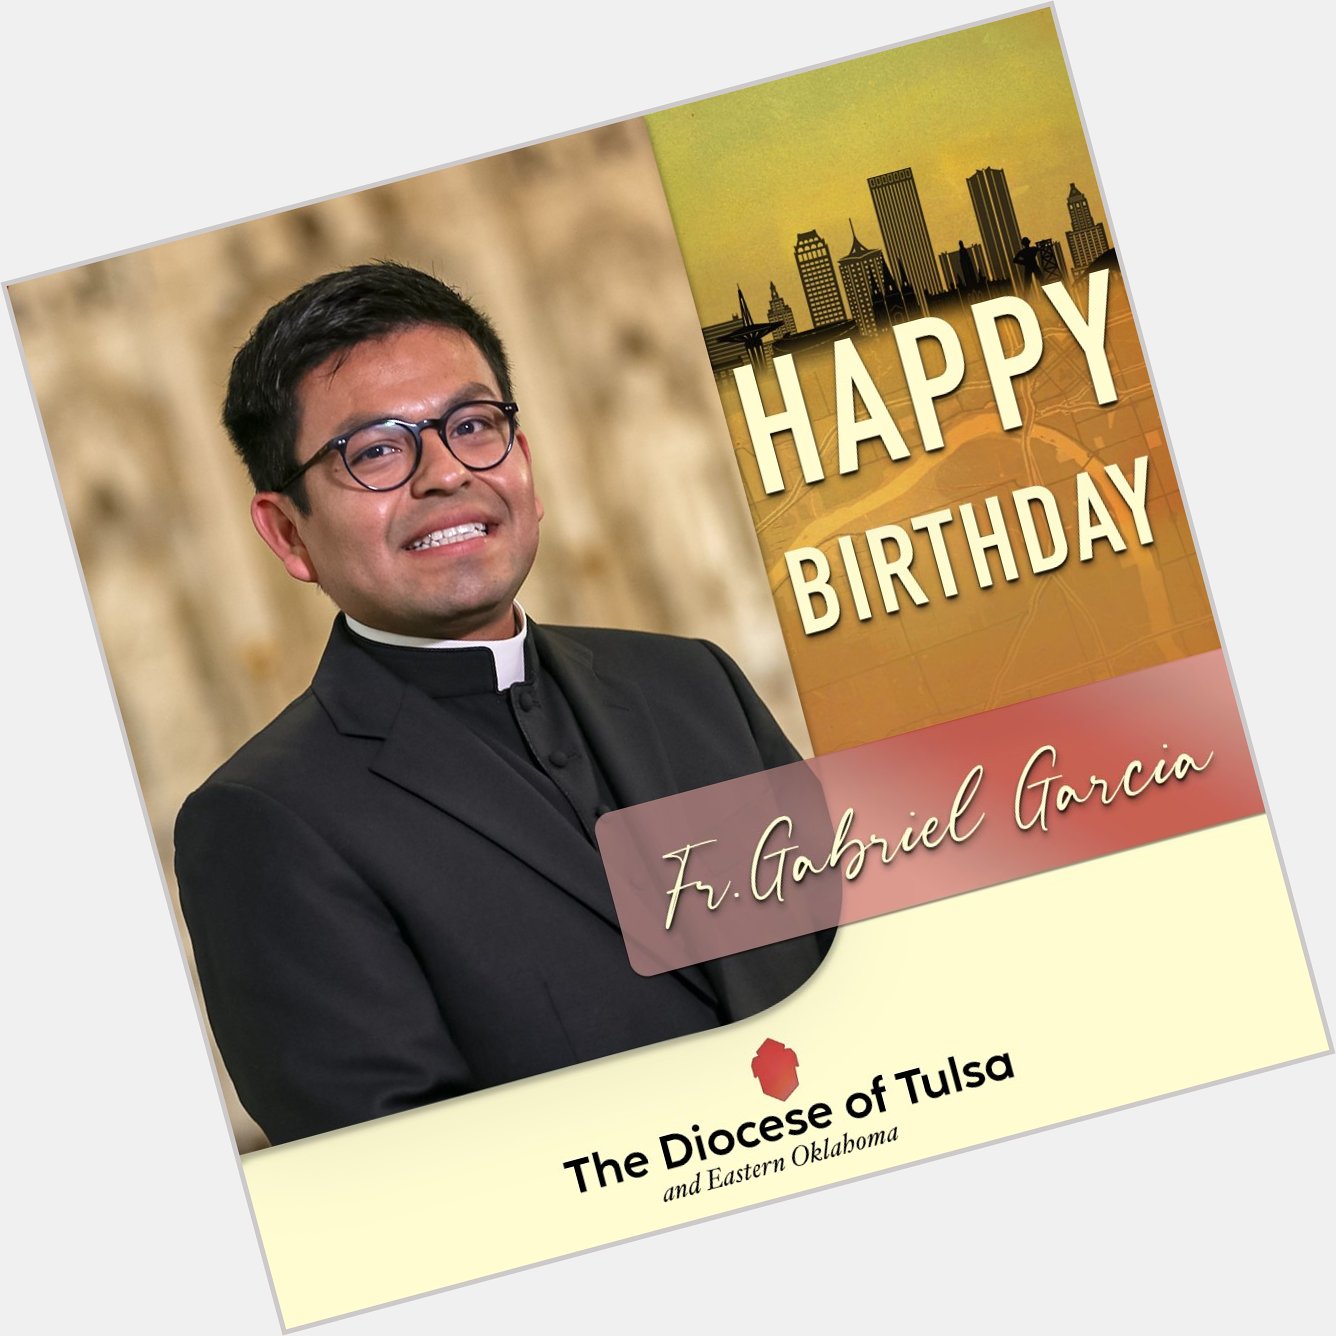 Let\s join together to wish Fr. Gabriel Garcia a happy birthday today.

Have a Blessed day! 